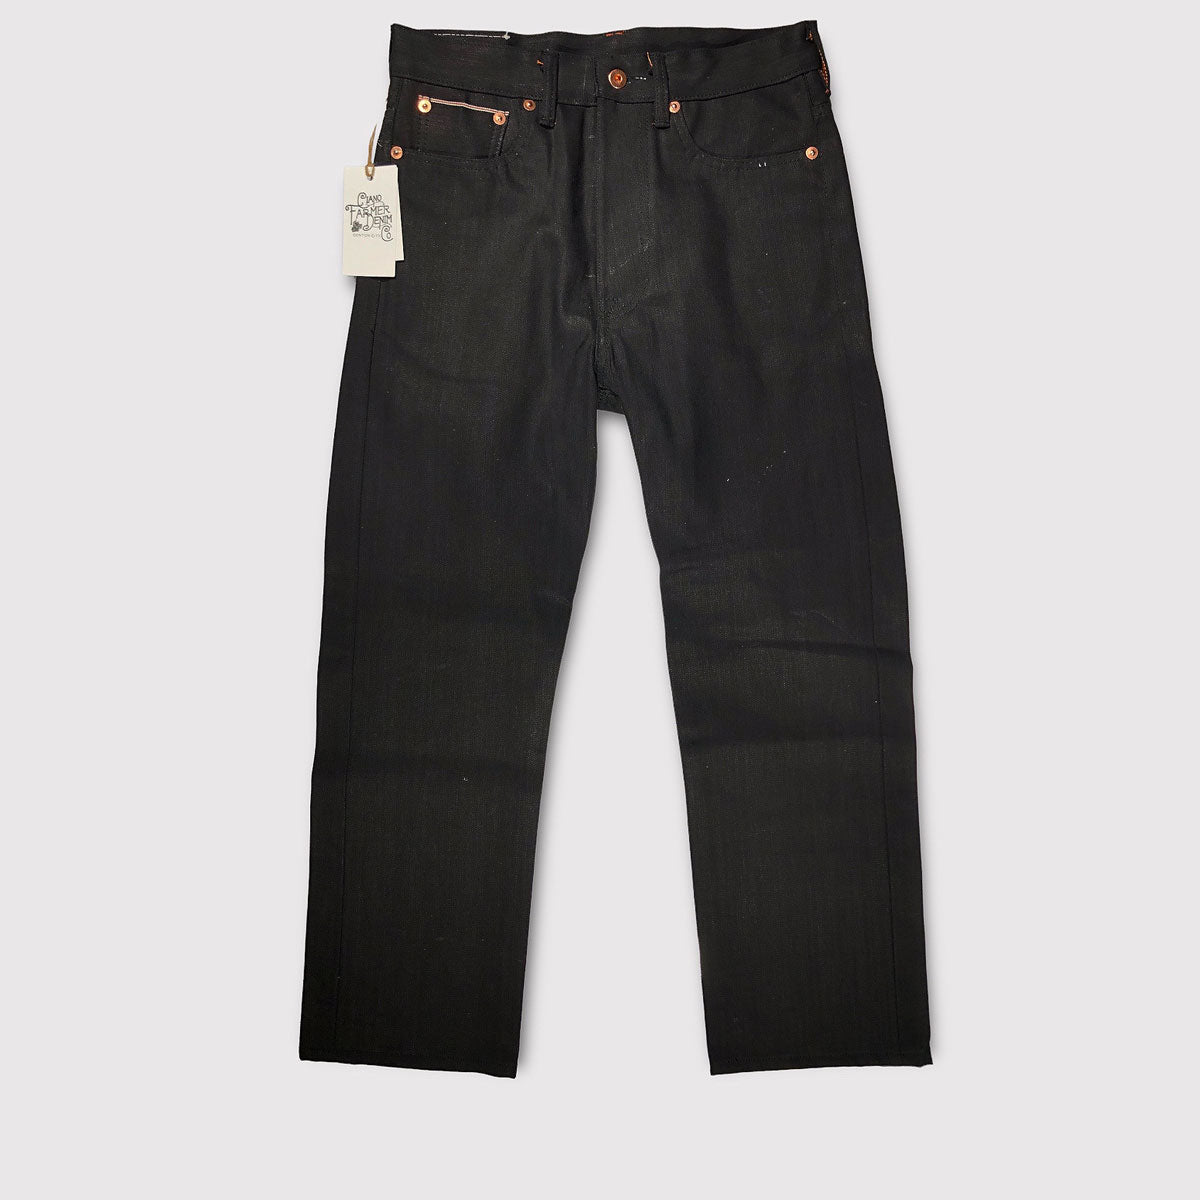 14oz Italian Double Black Red/White Selvage 5 POCKET 29W 27.5L 997 Miner Fit